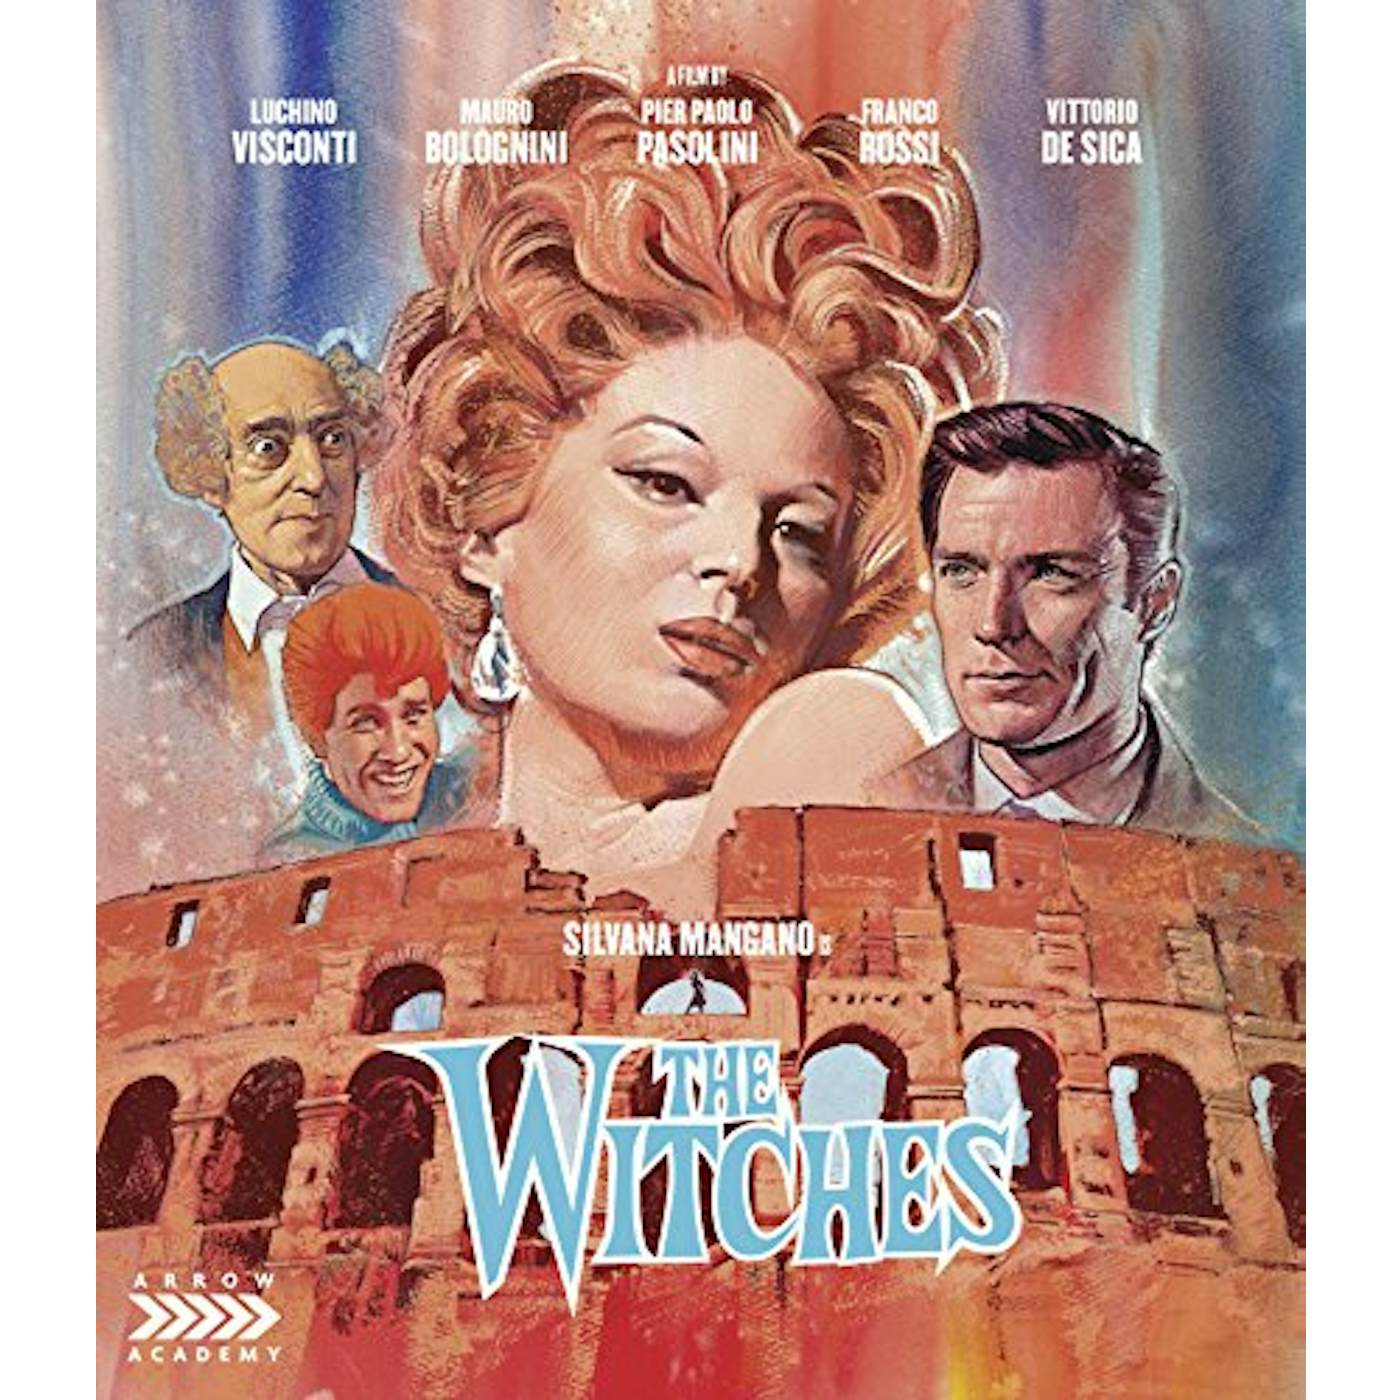 WITCHES Blu-ray